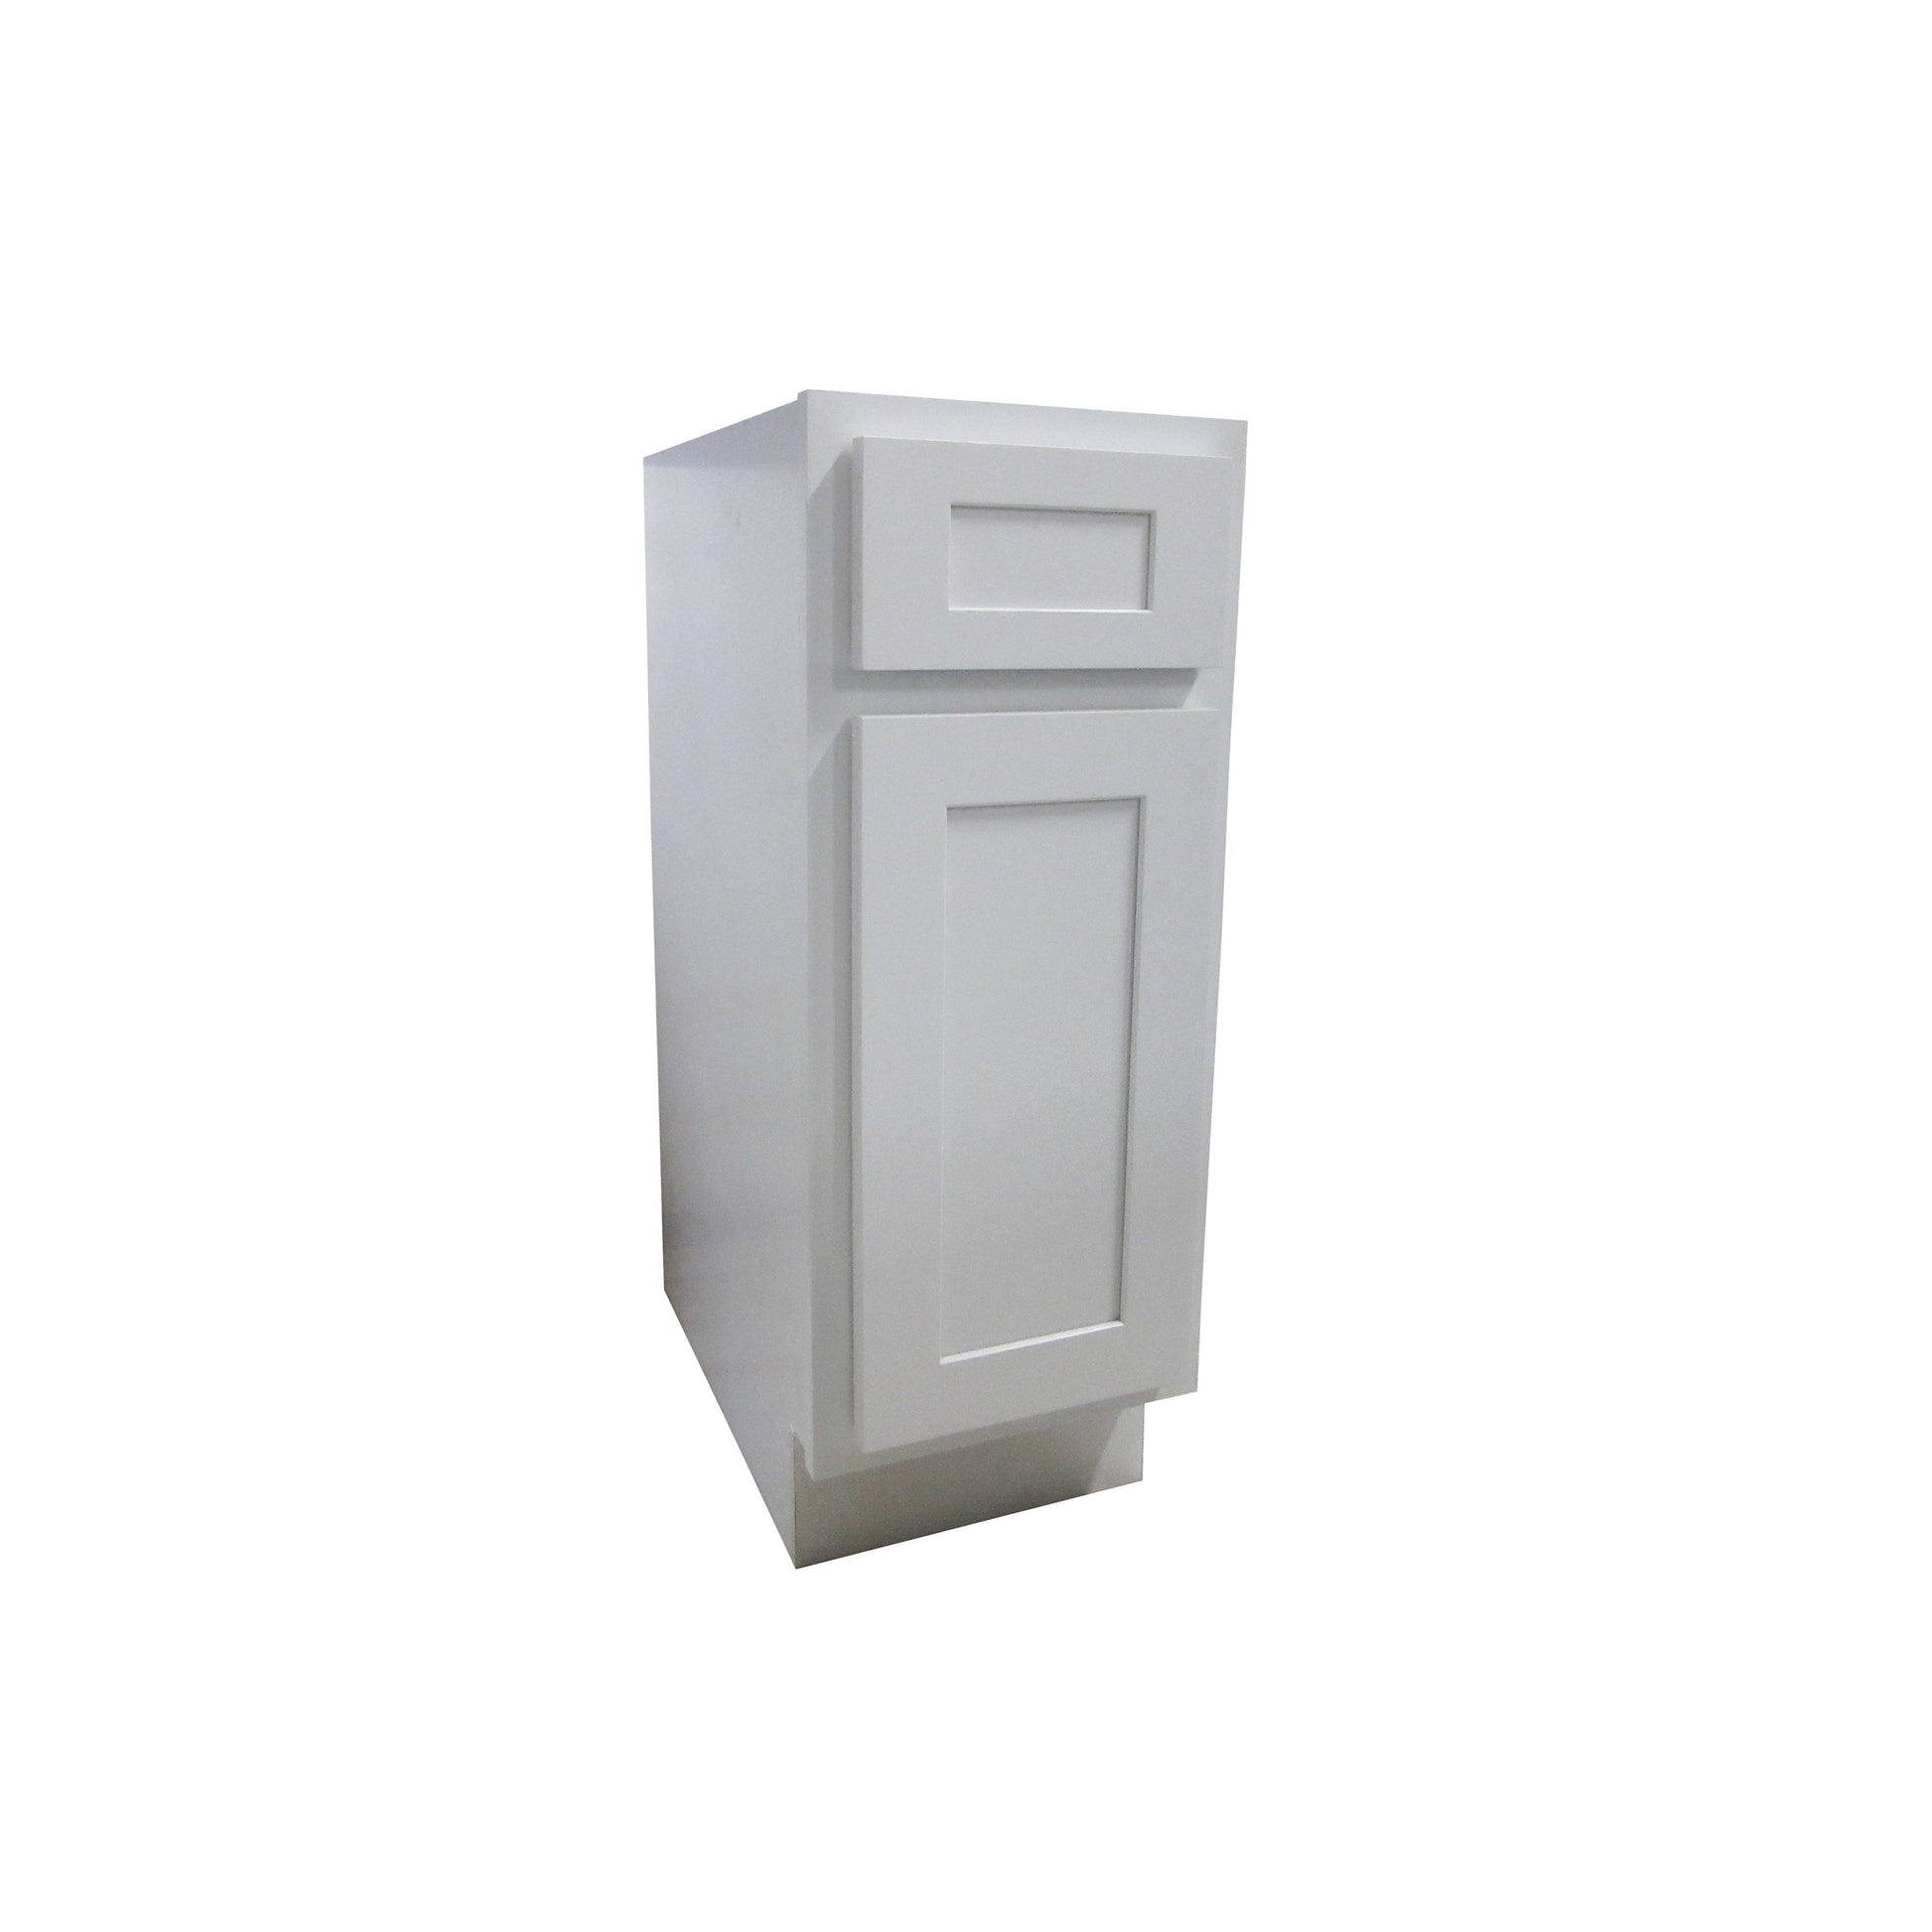 Vanity Art 12" White Single Right Offset Freestanding Solid Wood Vanity Cabinet With Soft Closing Door and Drawer